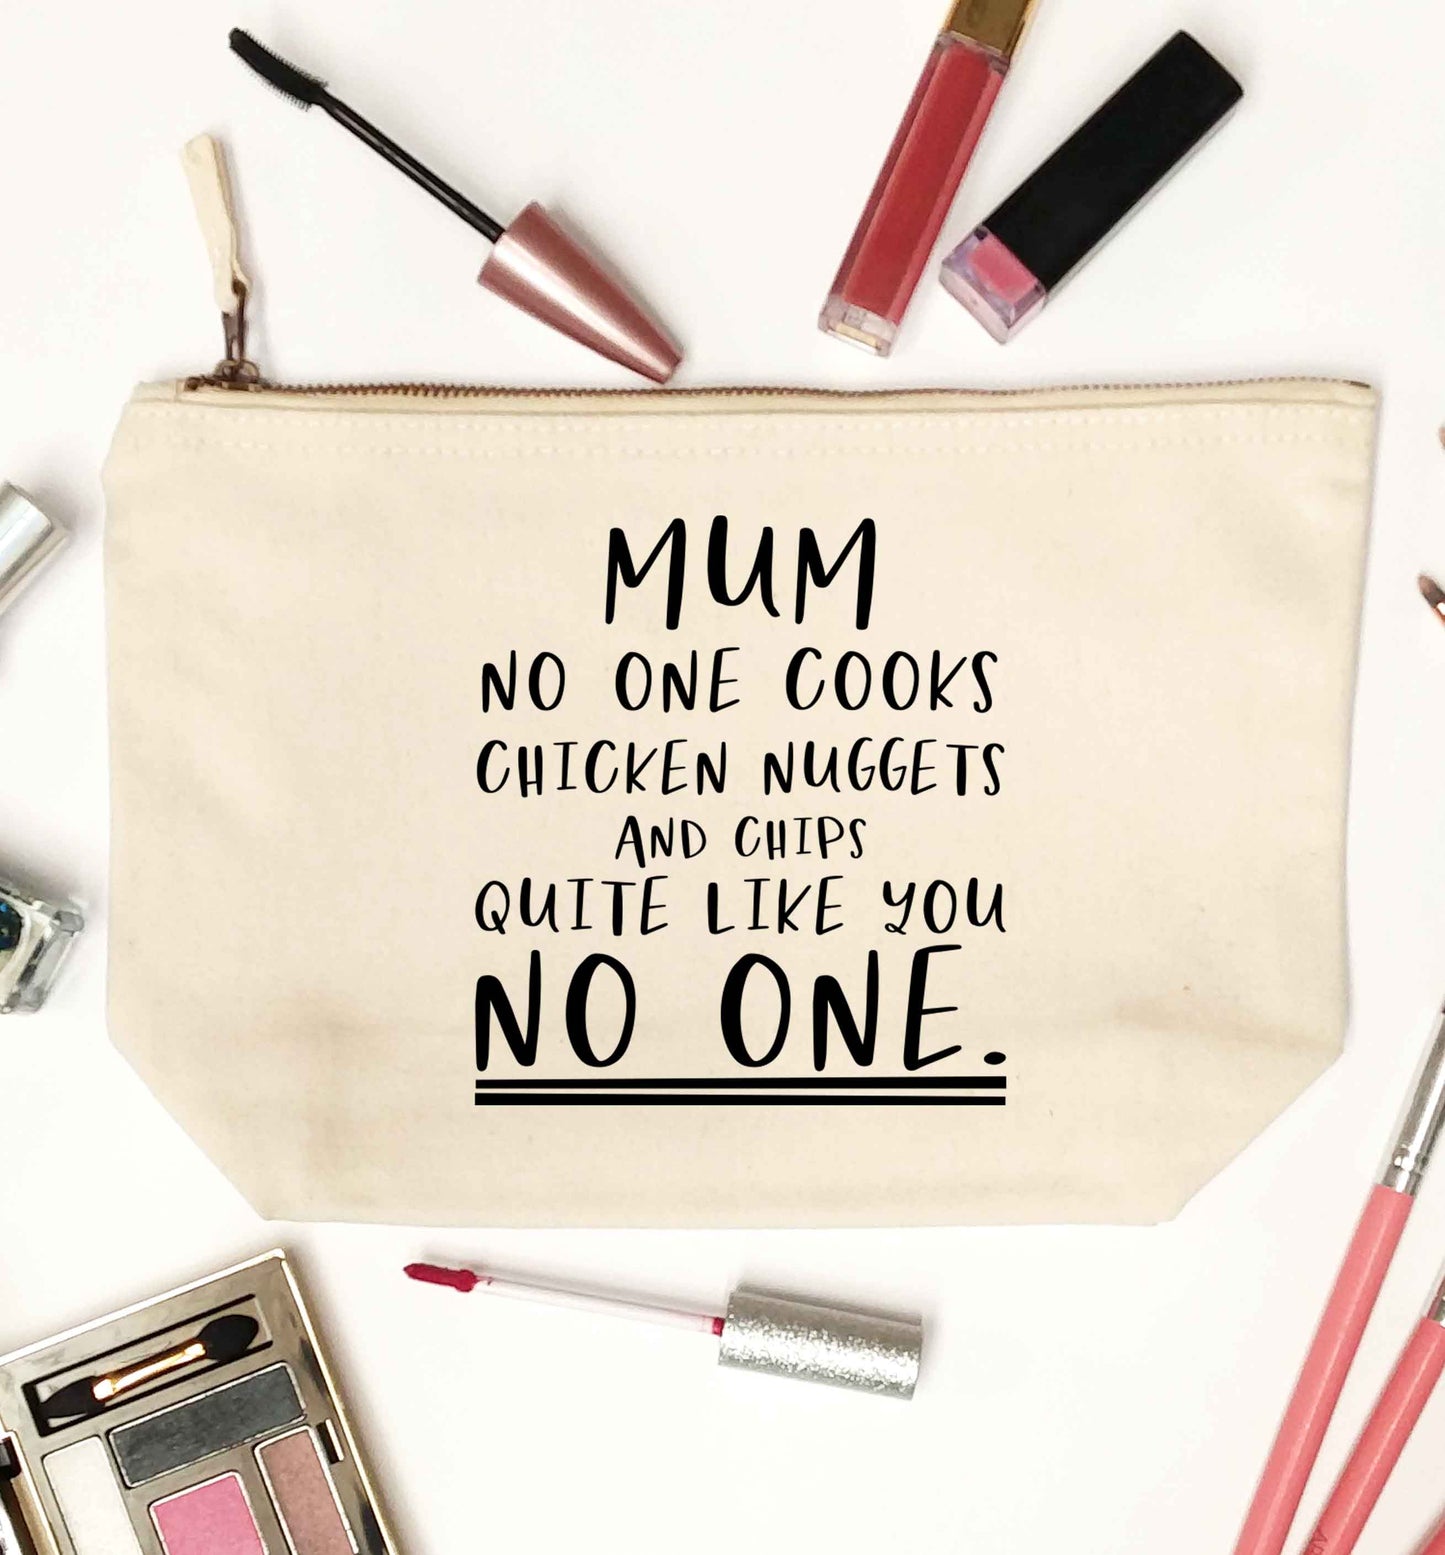 Super funny sassy gift for mother's day or birthday!  Mum no one cooks chicken nuggets and chips like you no one natural makeup bag